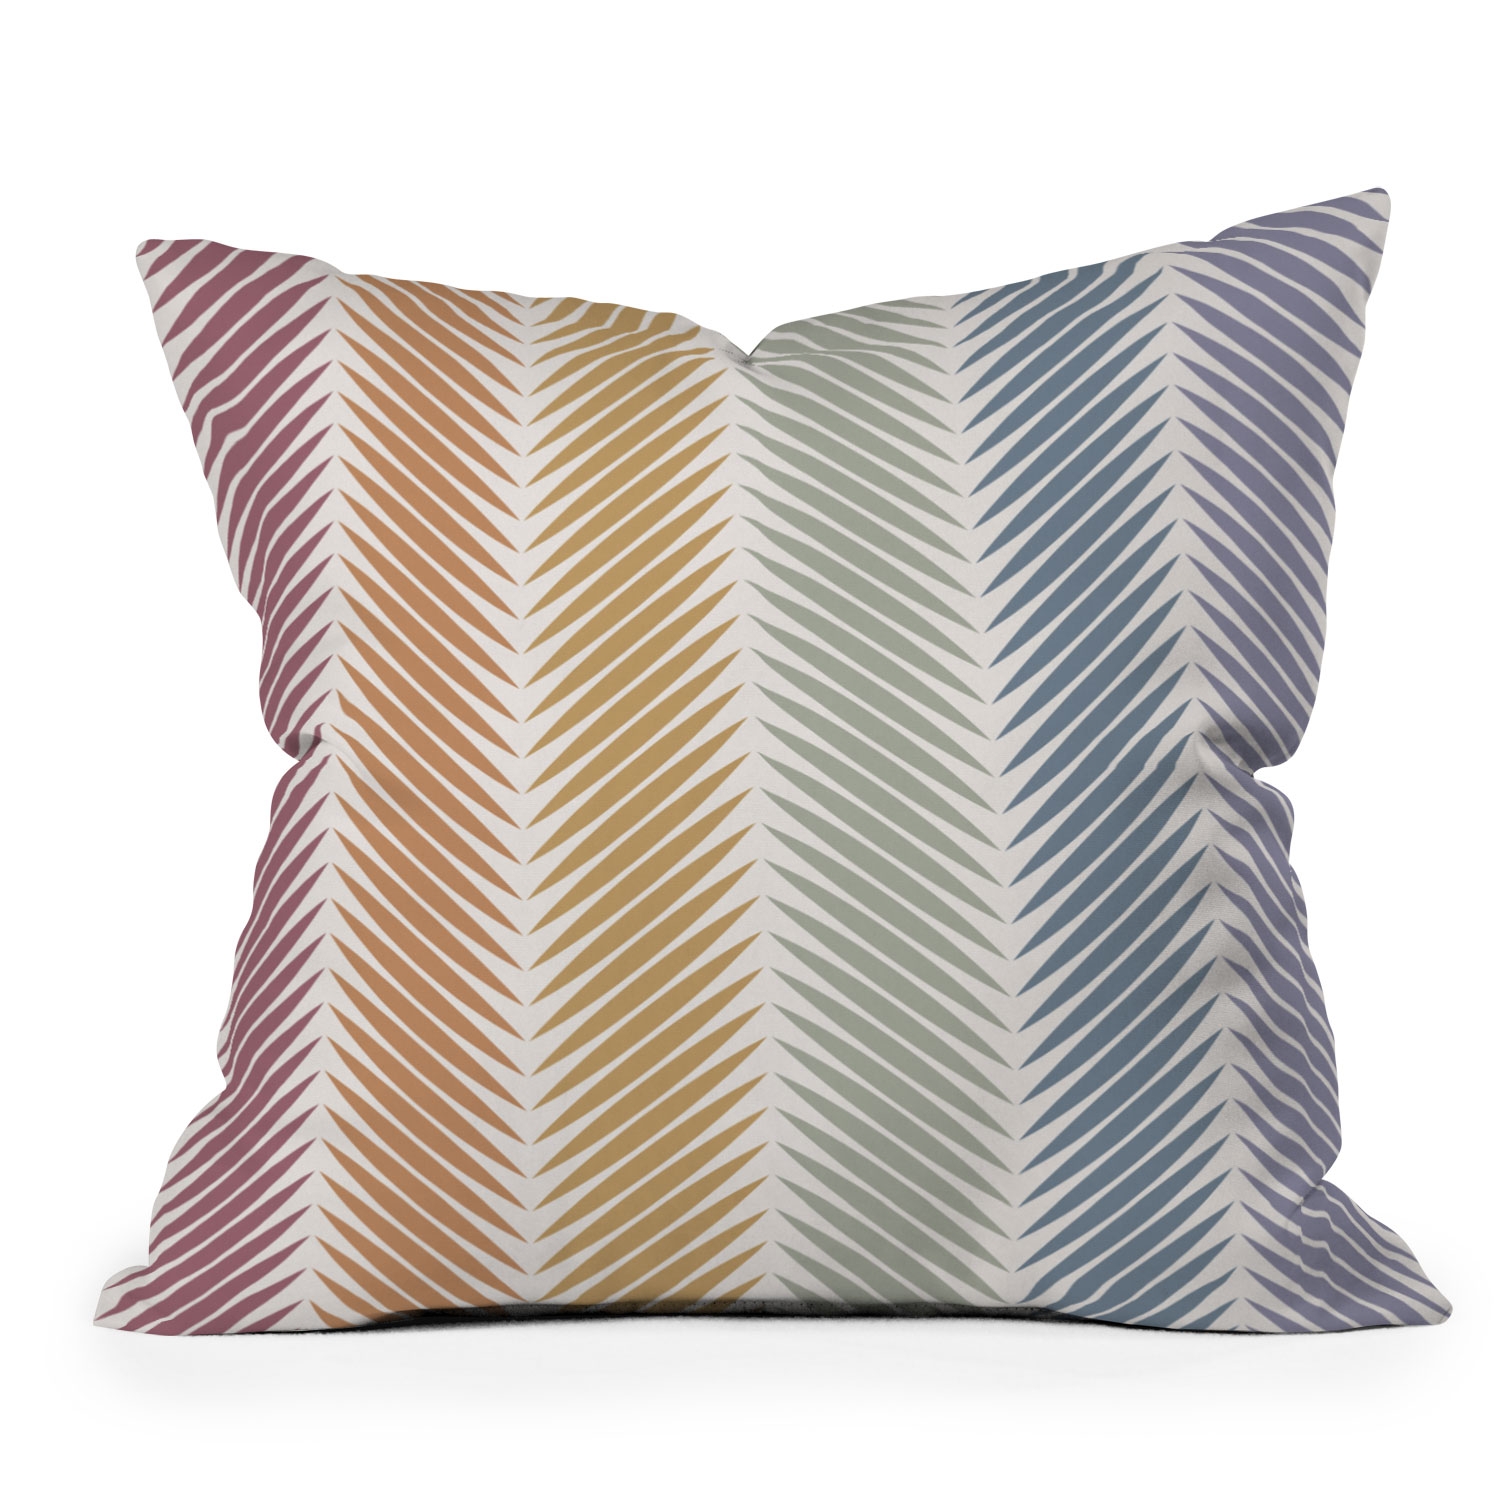 Palm Leaf Pattern Lxiv by Colour Poems - Outdoor Throw Pillow 16" x 16" - Image 3